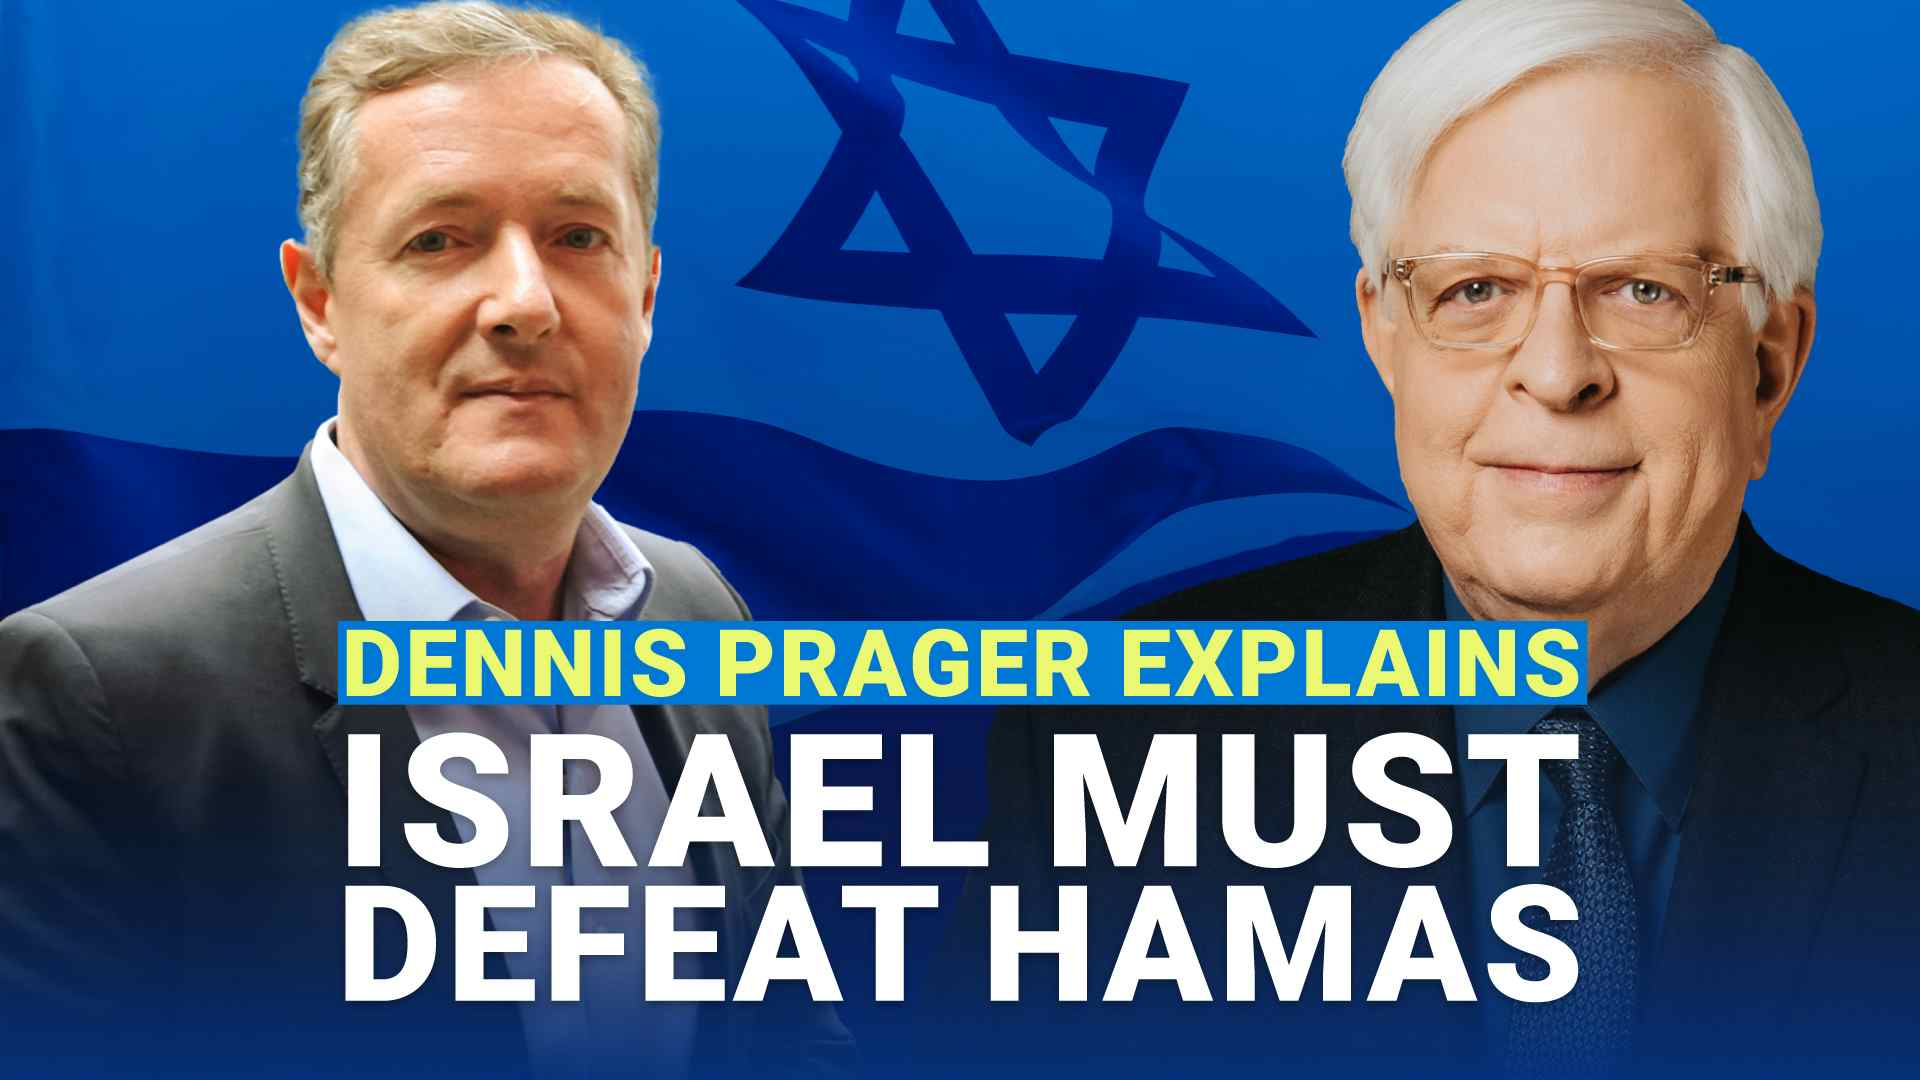 Dennis Prager Explains Why Hamas Must Be Defeated by Israel